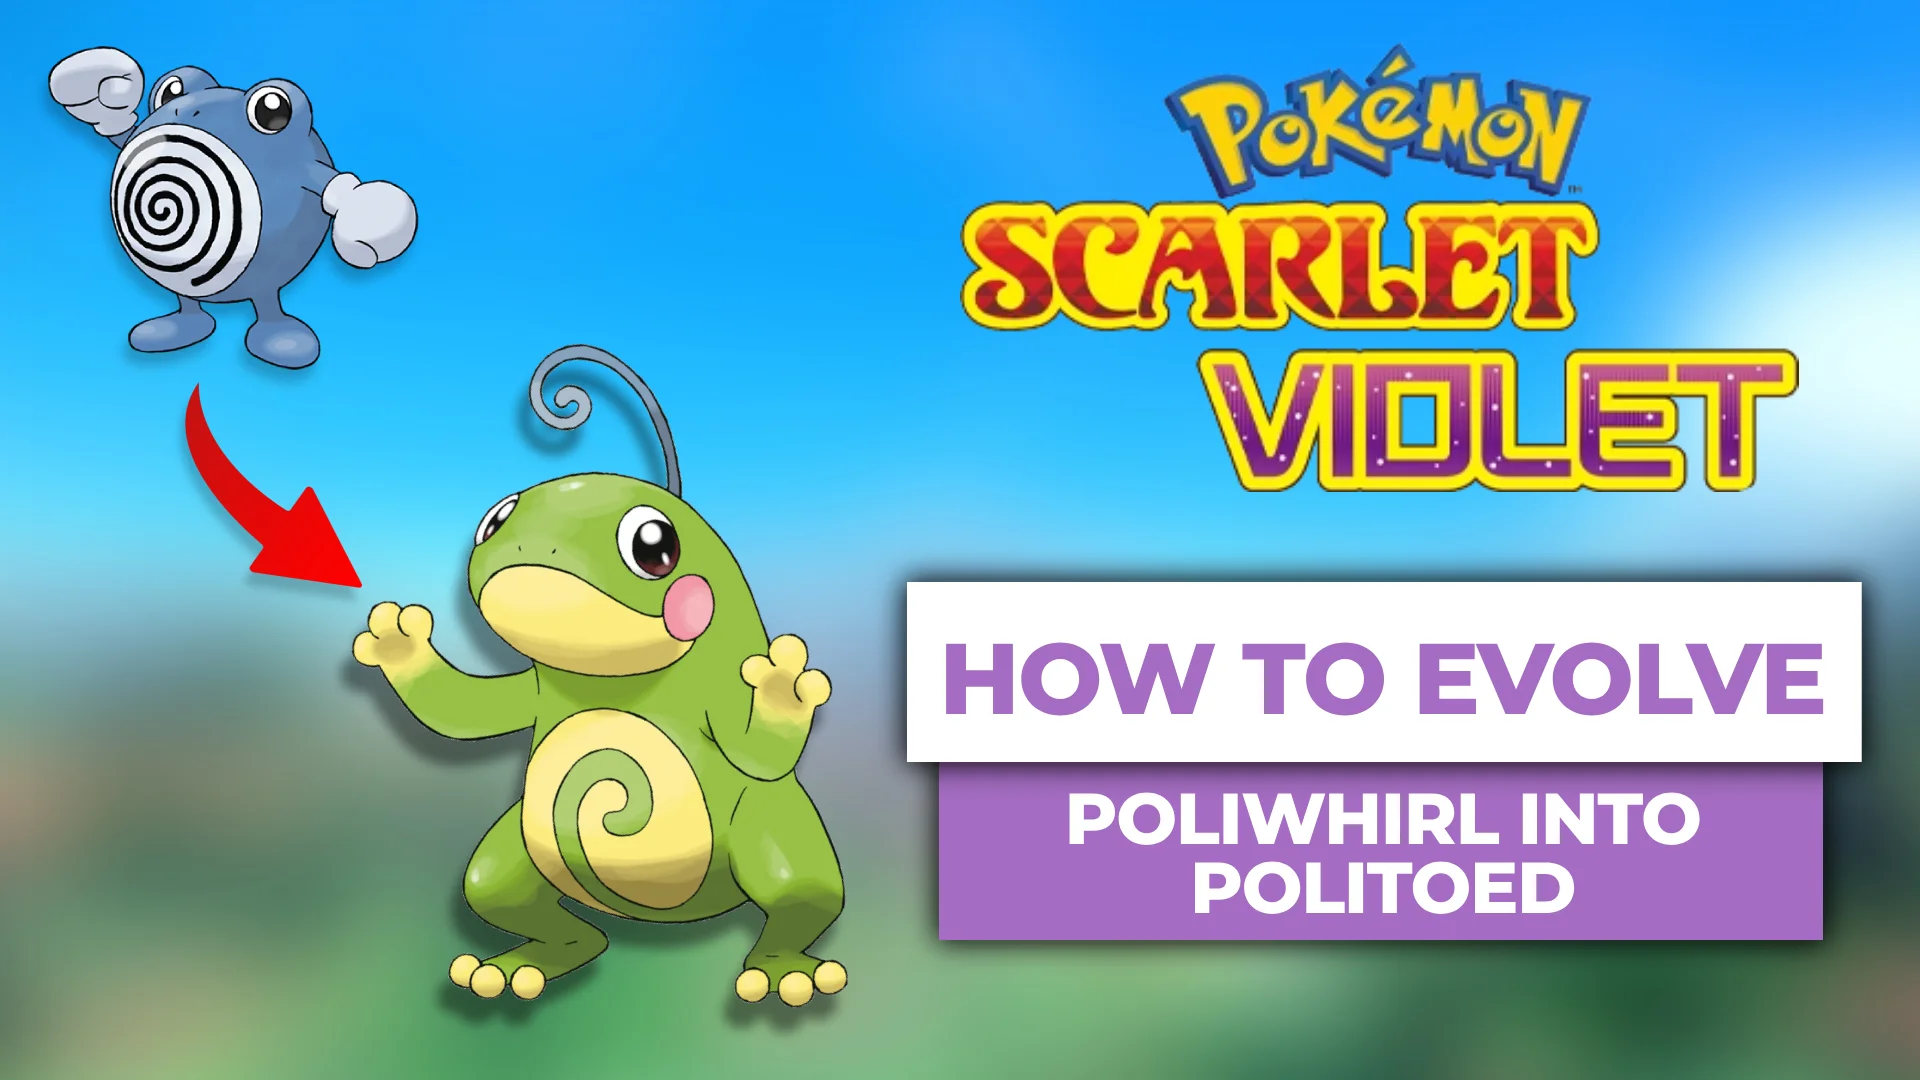 how to evolve poliwhirl into politoed pokemon scarlet violet the teal mask